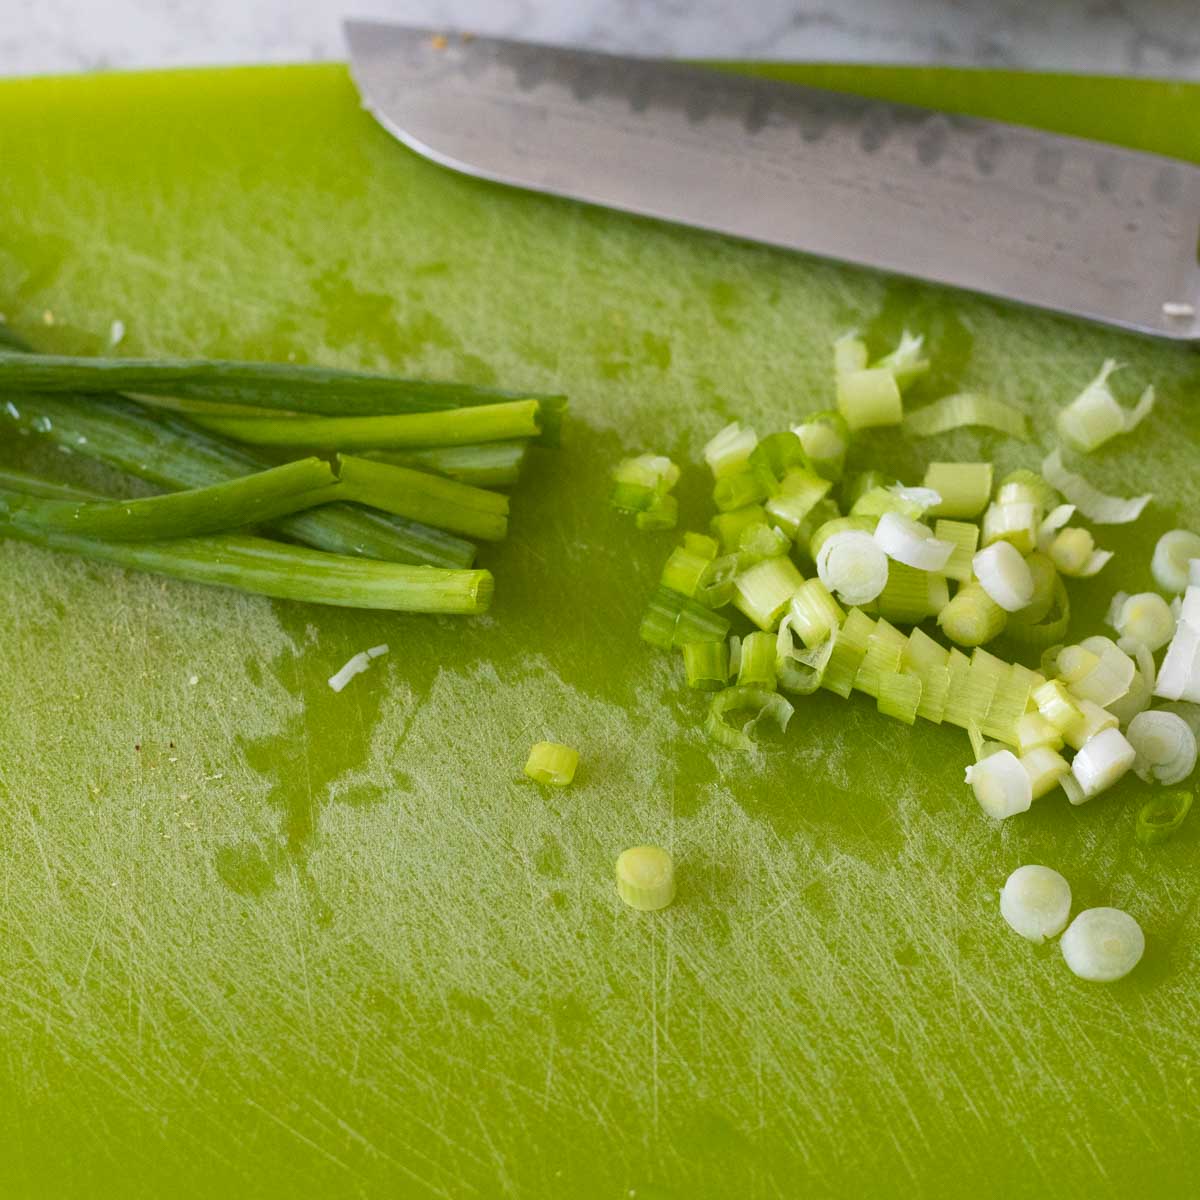 The white and green parts of the green onion have been separated and chopped.